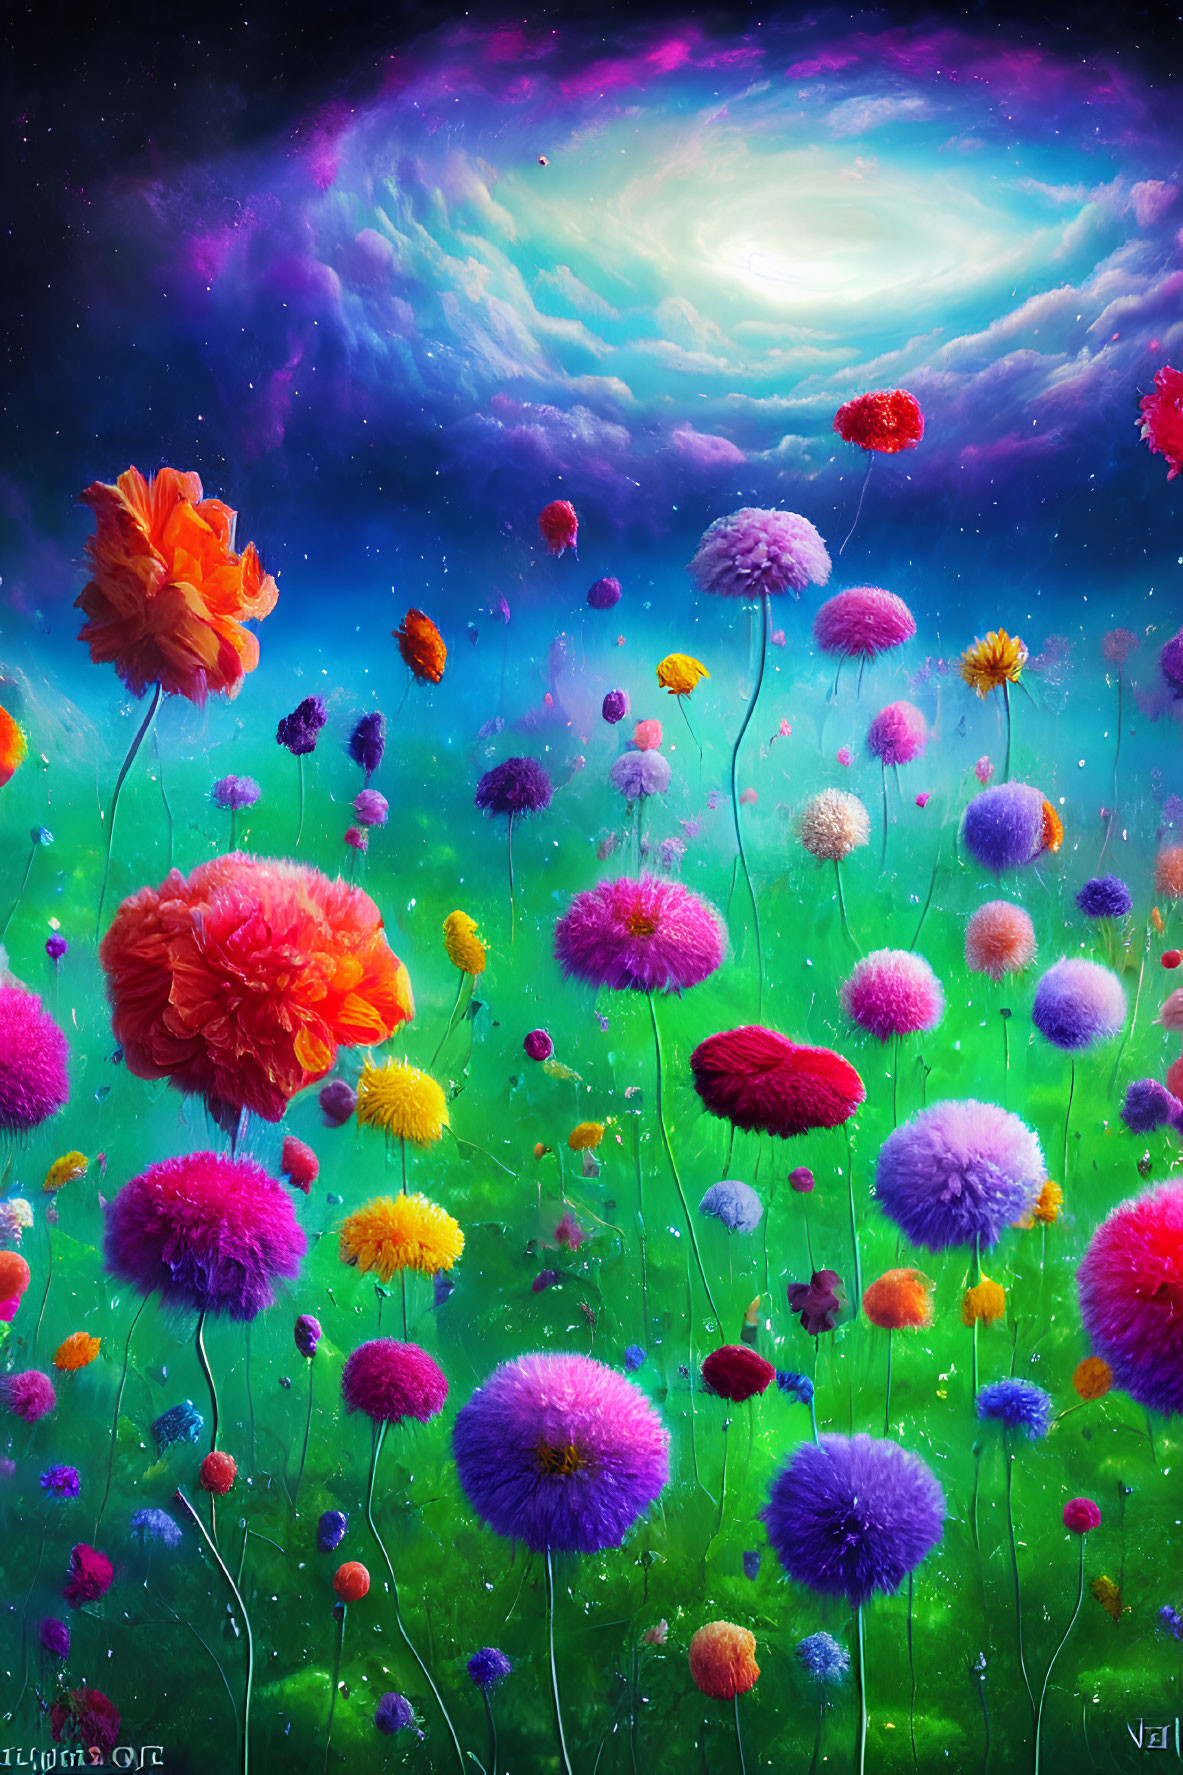 Colorful Flowers Field Under Starry Sky with Moon and Clouds